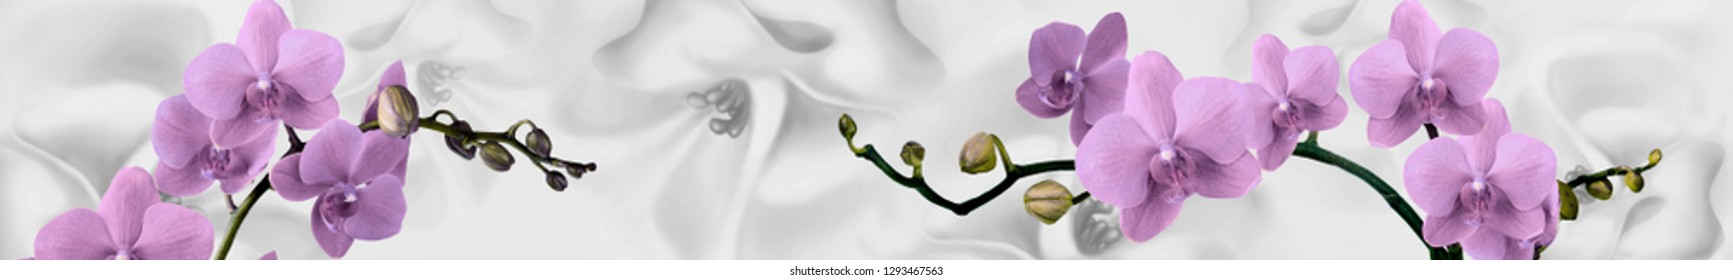 Orchids on gray background